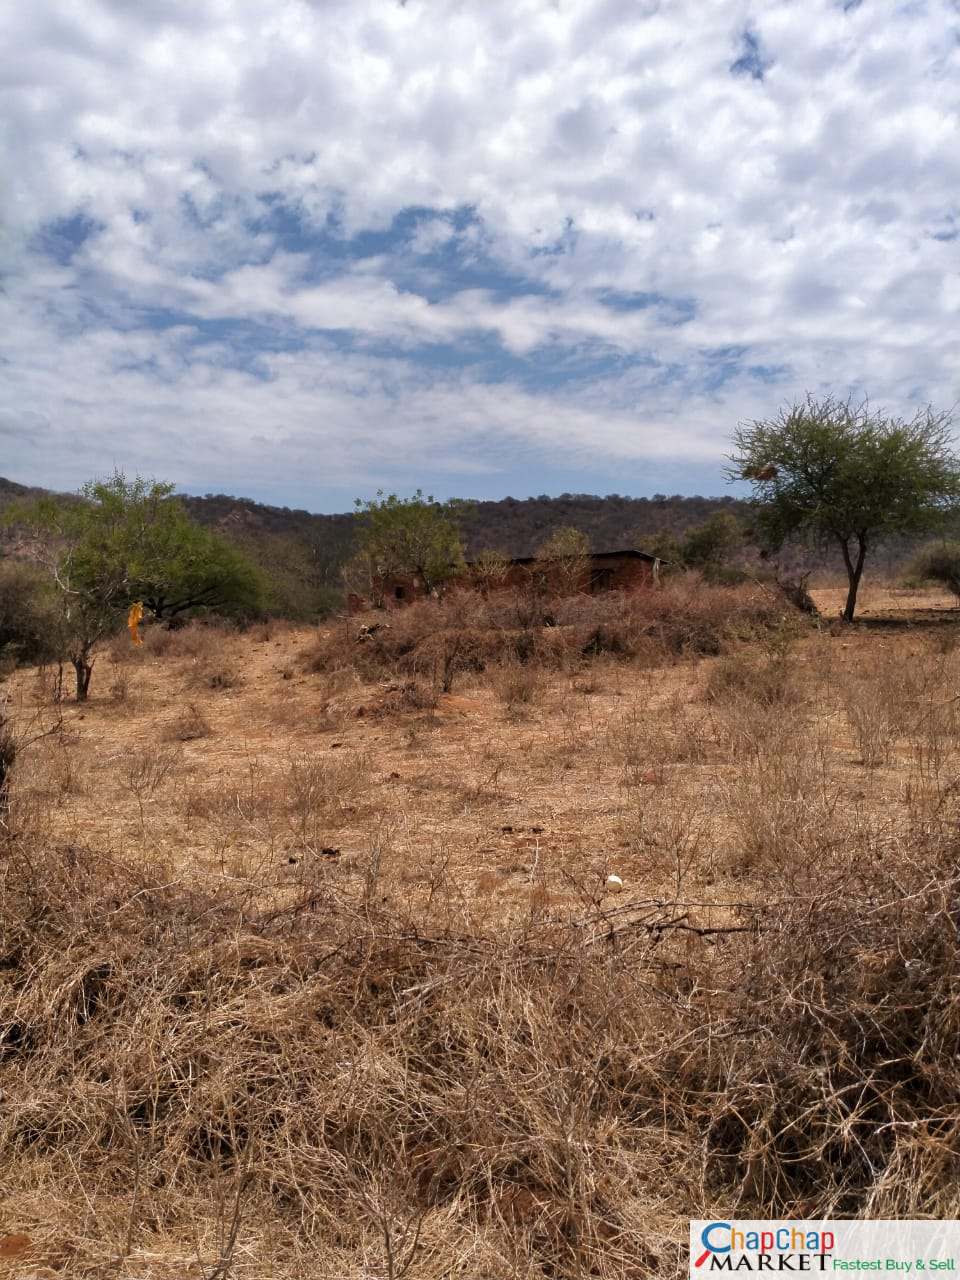 90 ACRES Land for Sale in kibwezi – Kitui road. CLEANEST CHEAPEST DEAL!